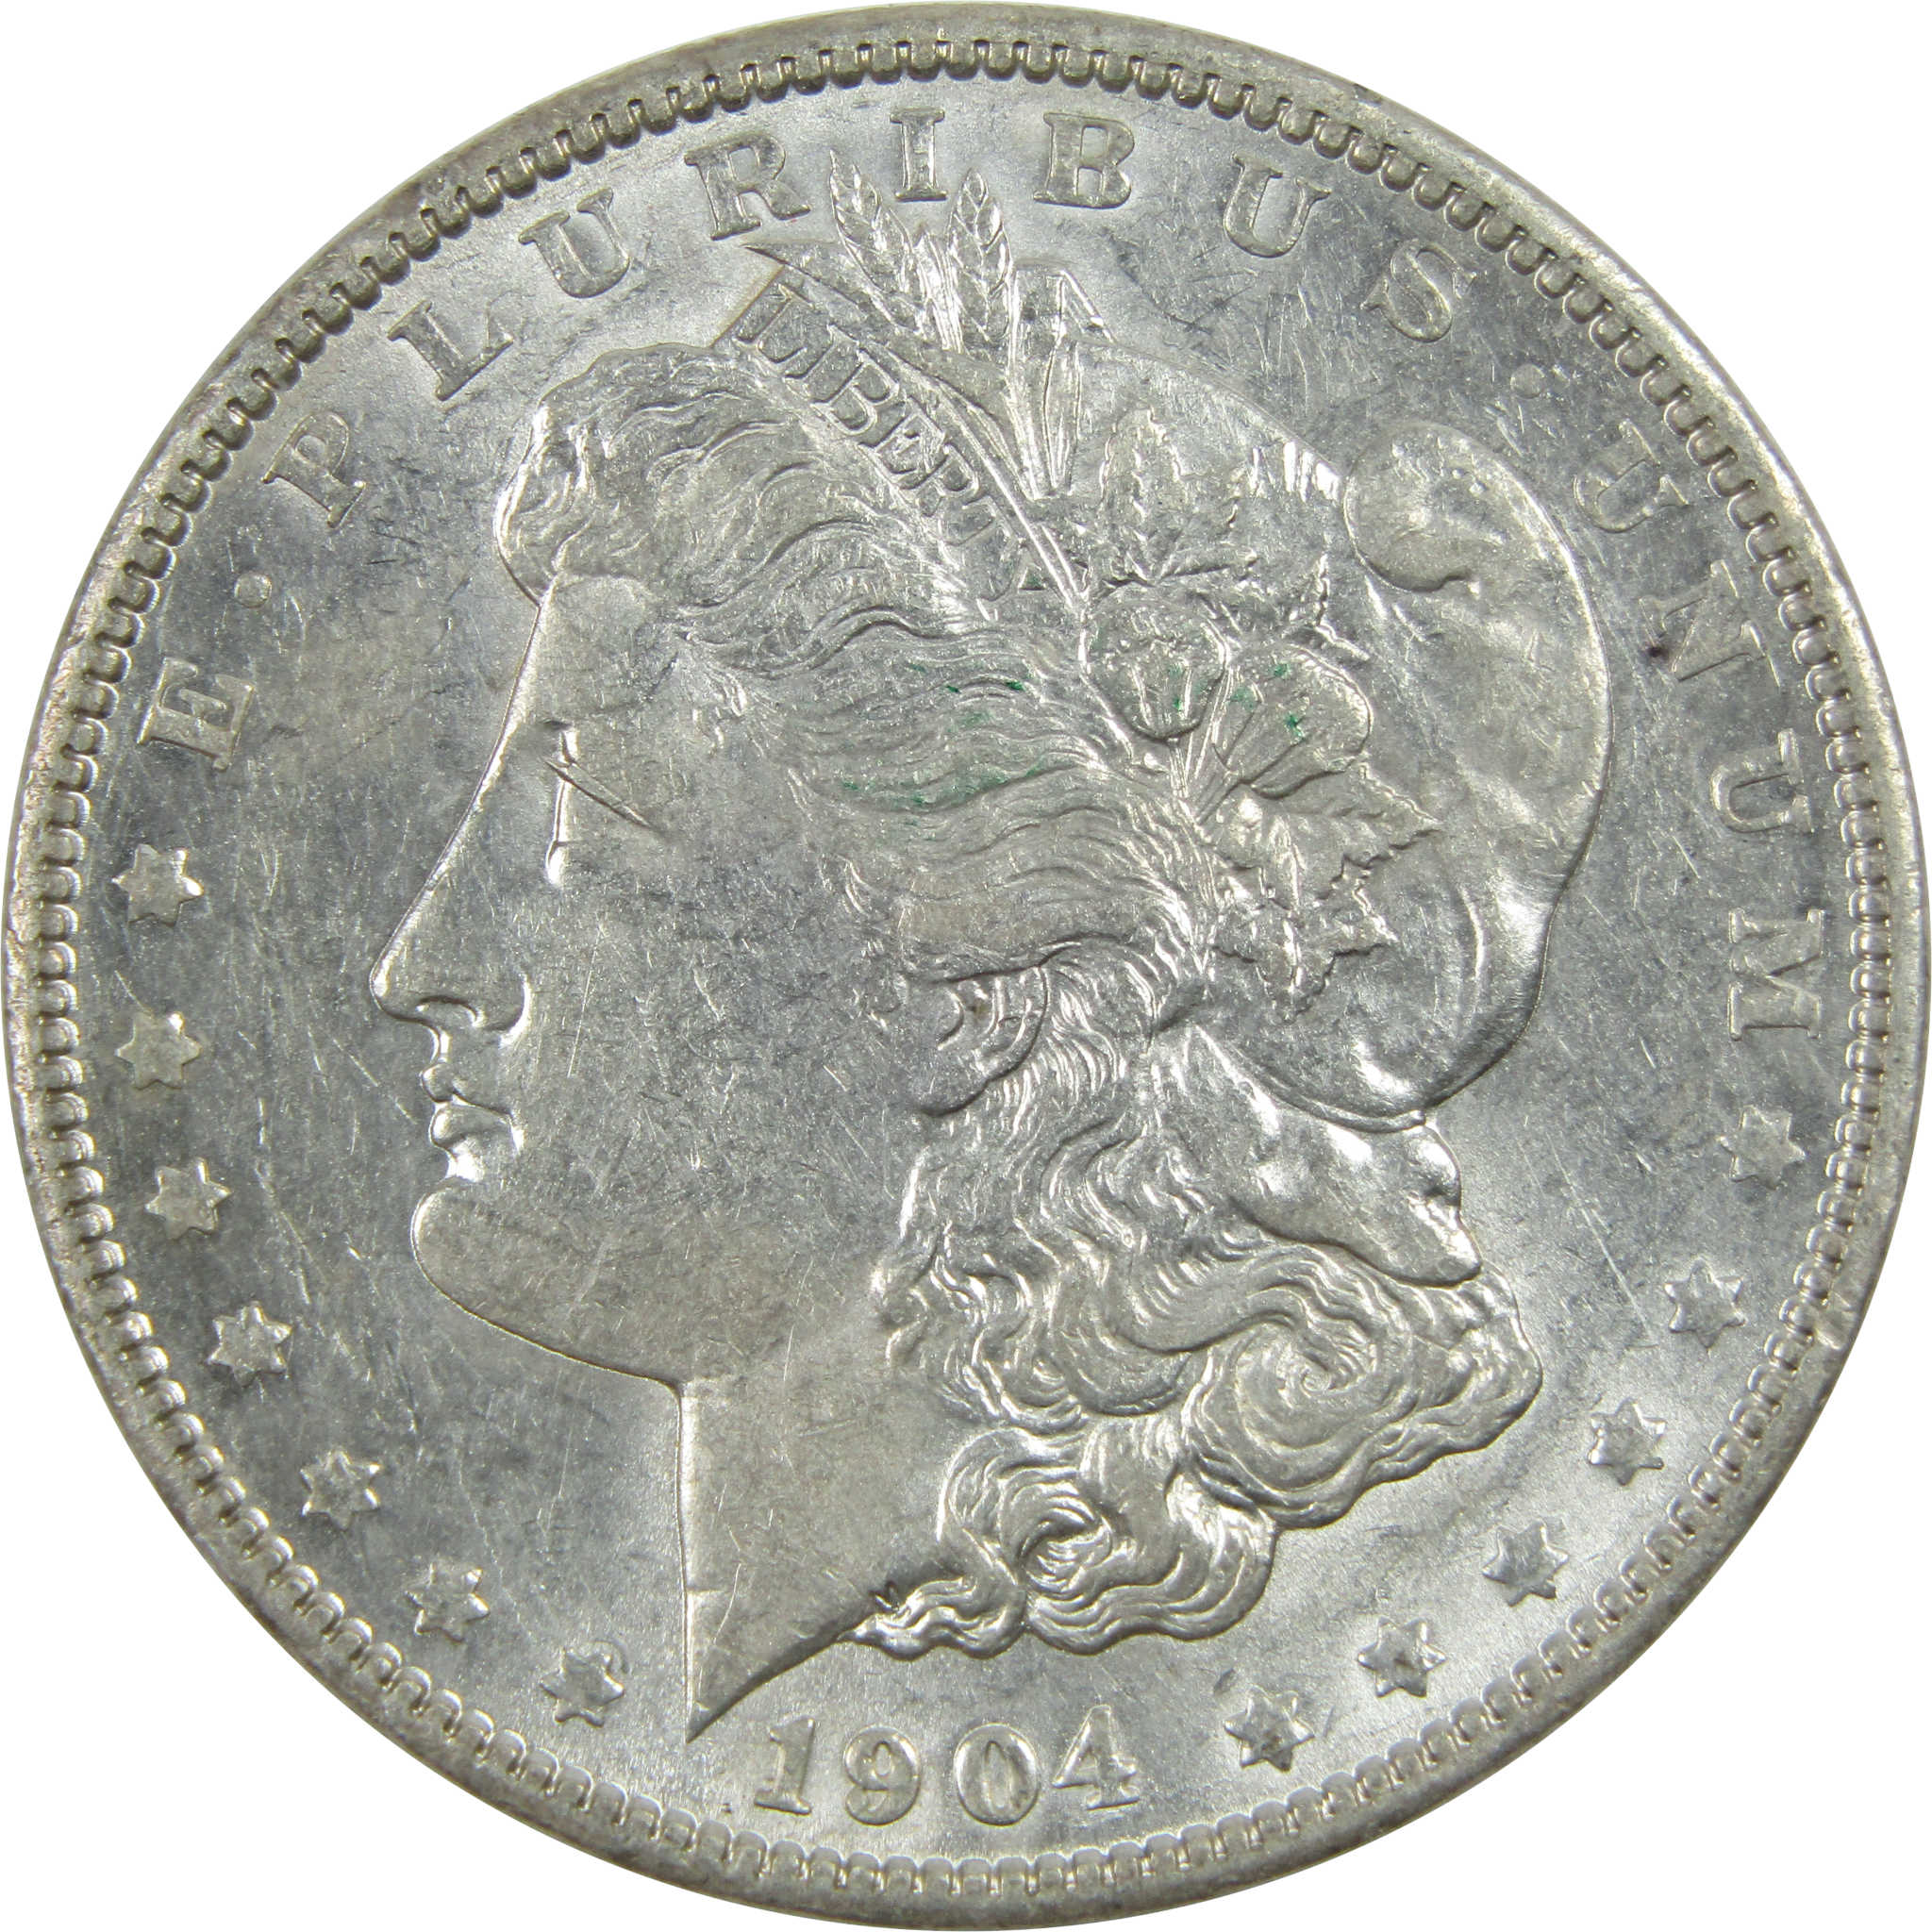 1904 Morgan Dollar AU About Uncirculated Silver $1 Coin SKU:I13368 - Morgan coin - Morgan silver dollar - Morgan silver dollar for sale - Profile Coins &amp; Collectibles